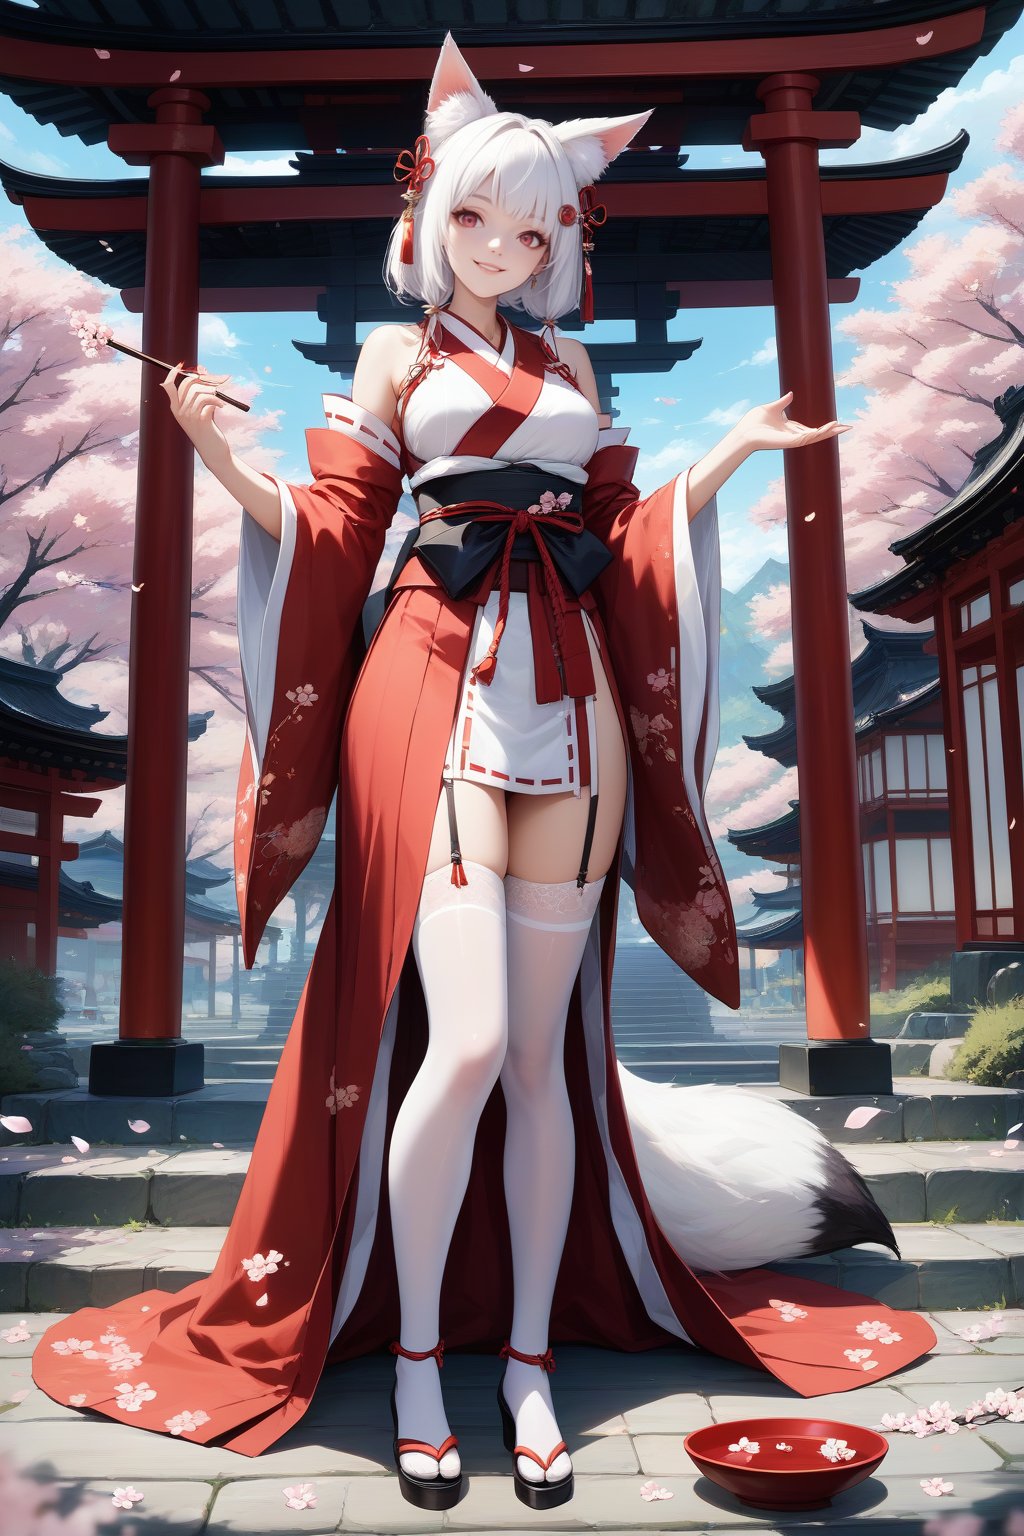 score_9, score_8_up, score_7_up, masterpiece, best quality, realistic, 
BREAK
1girl, the action of prayer, animal fox ears, red eyes, long pure white hair, red skirt, Miko attire, hair ornament, full body, goth girl, garter straps, Japanese shrine, cherry blossoms, The girl stood with a huge silver fox, whose eyes glowed, White stockings, FuturEvoLabgirl